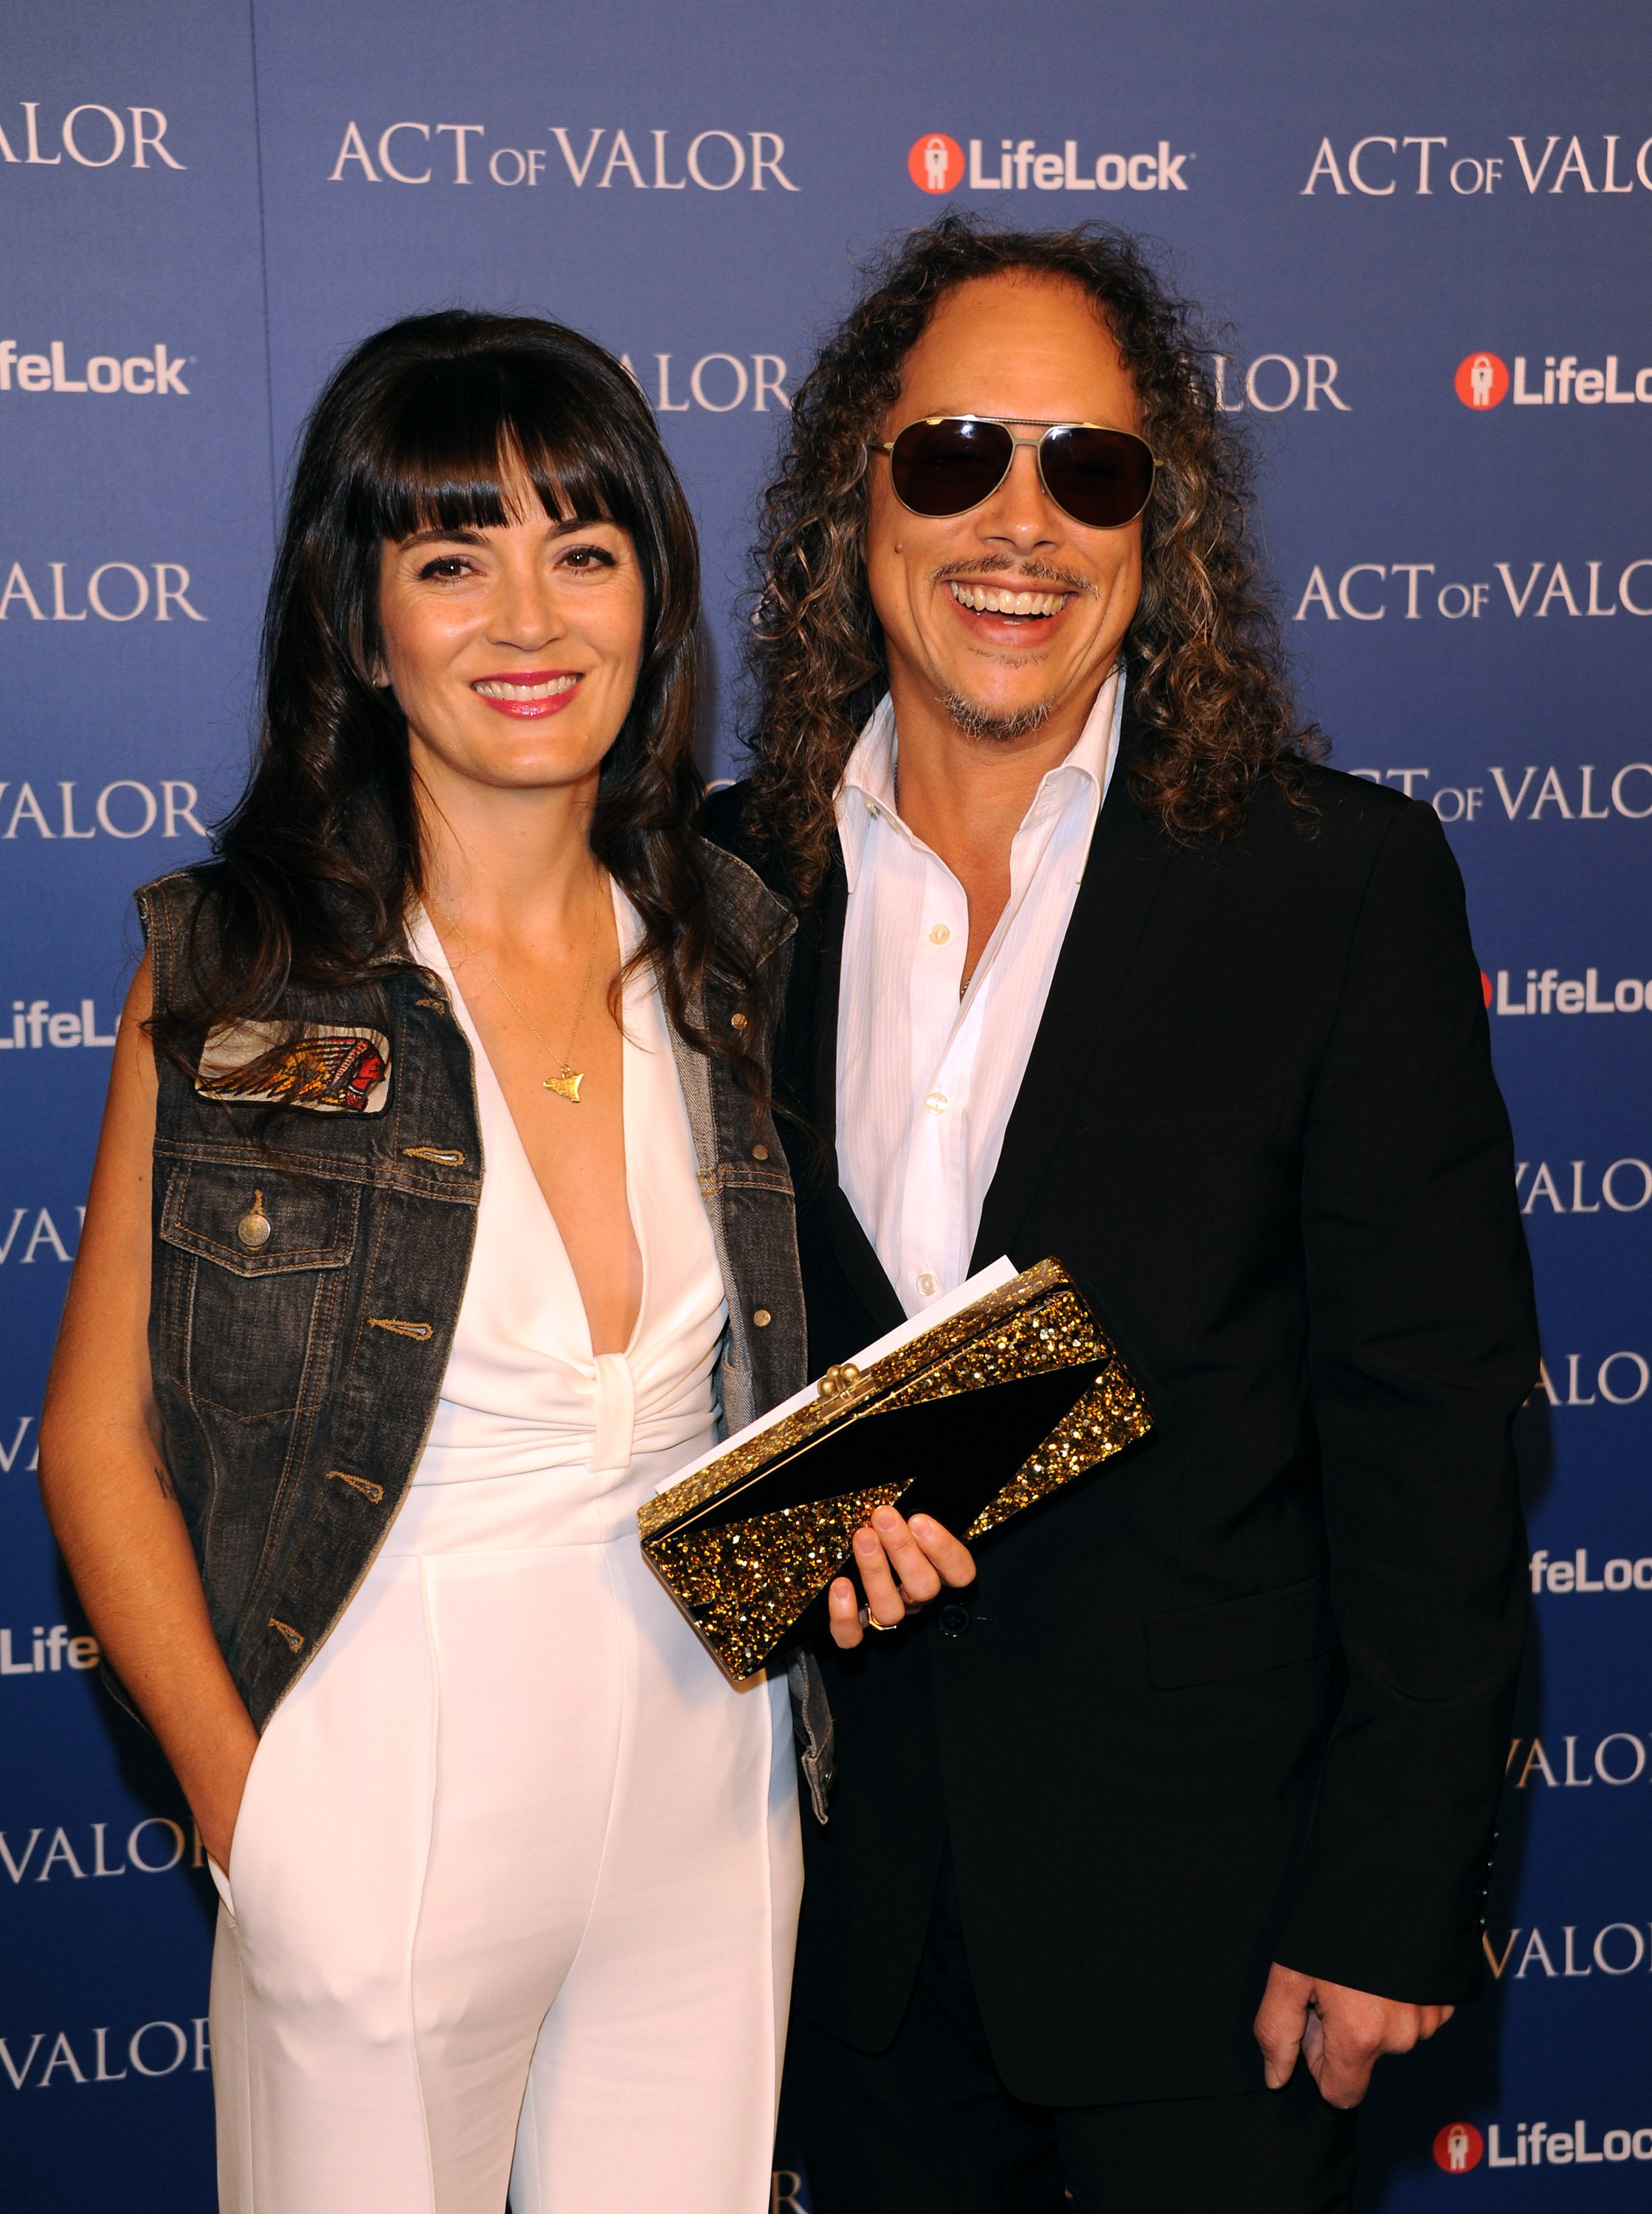 Lani Hammett and Kirk Hammett at the premiere of "Act of Valor" on February 13, 2012, in Hollywood. | Source: Getty Images